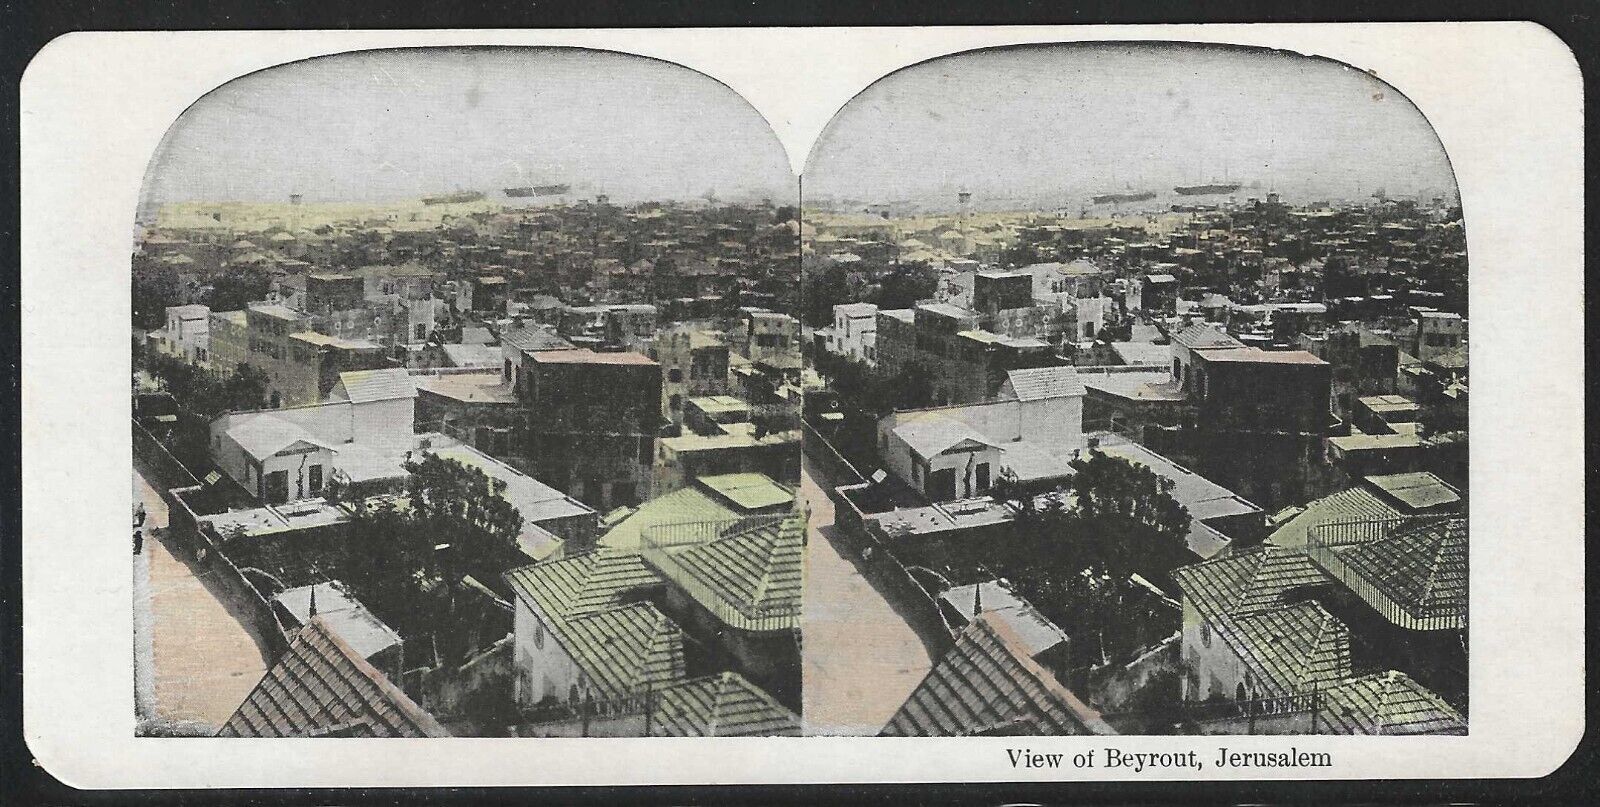 View of Beyrout, Jerusalem, Palestine, Hand Colored Stereographic View Card